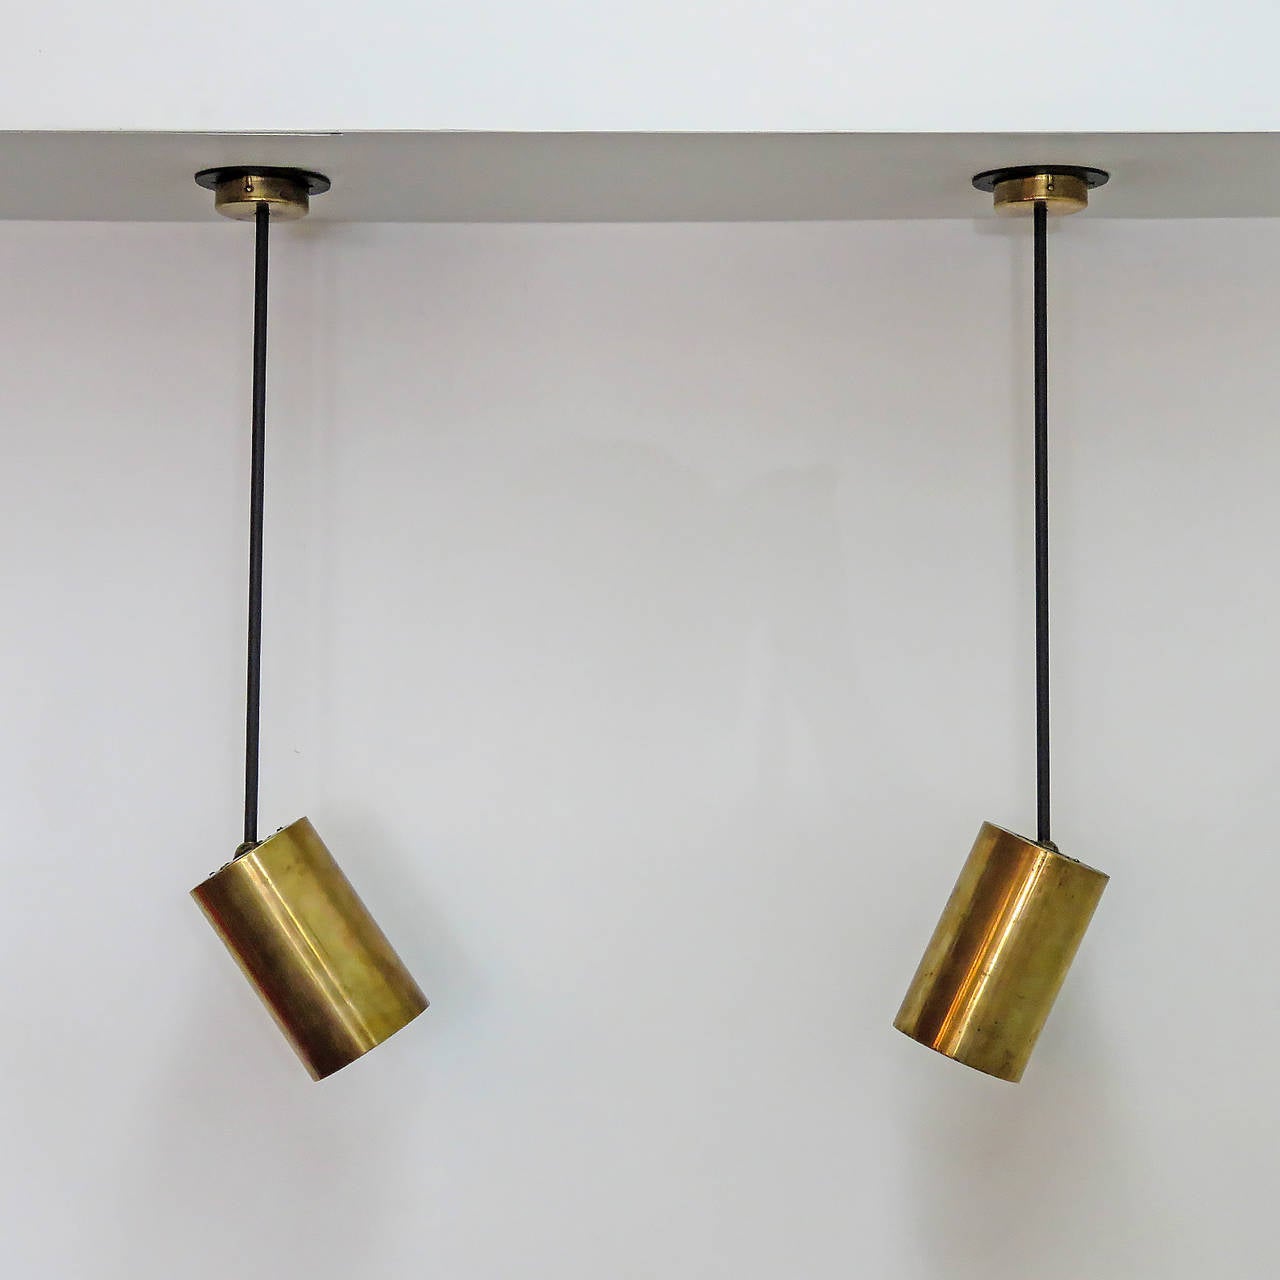 great pair of understated French ceiling lights by Parscot, long stem pendants with adjustable brass cylinders, can be used as wall lights, priced as a pair